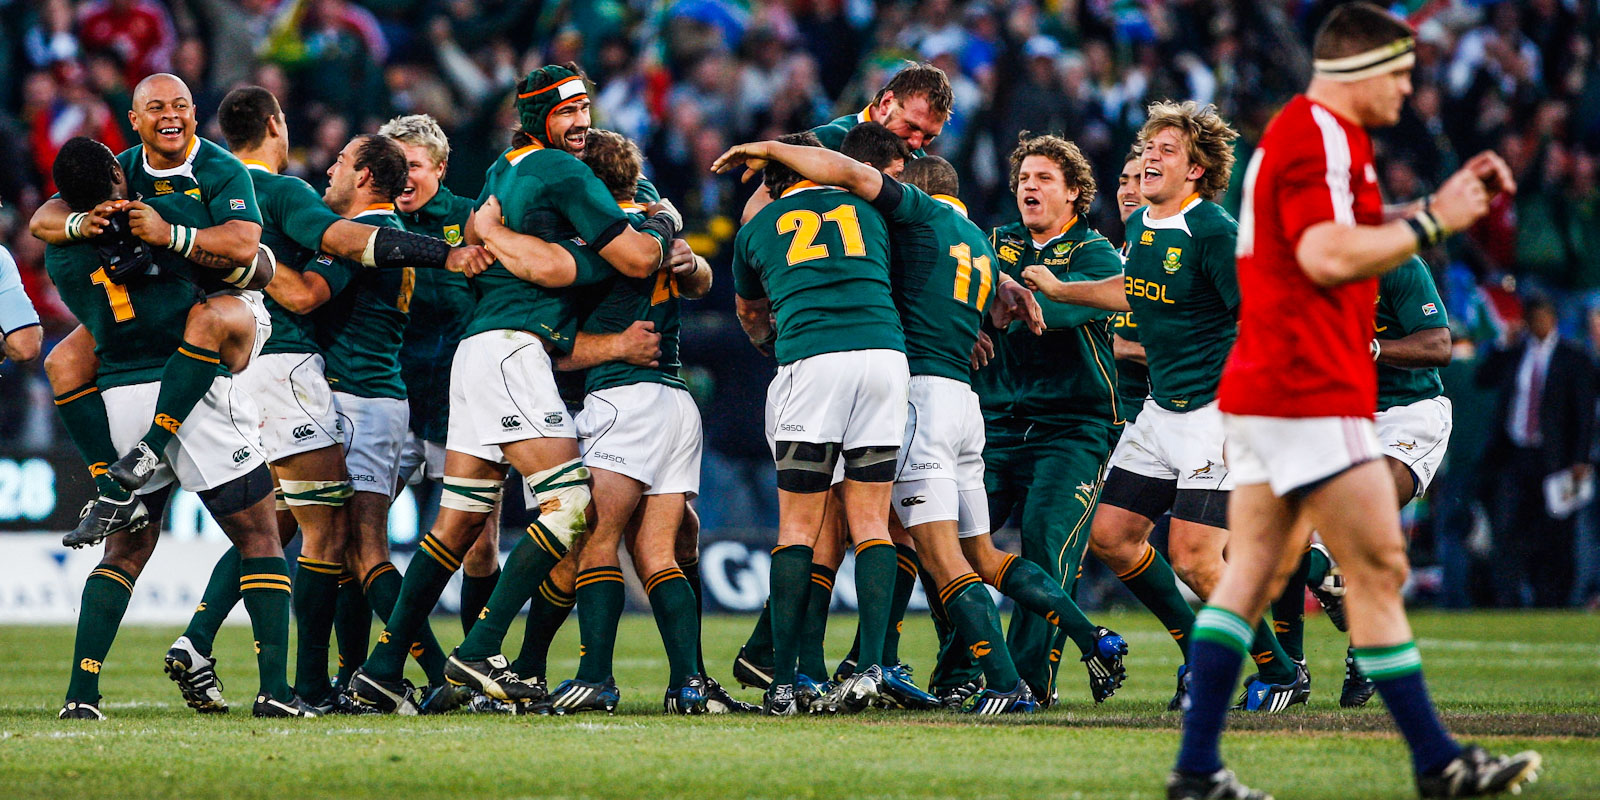 The Springboks celebrate after clinching the series in 2009.